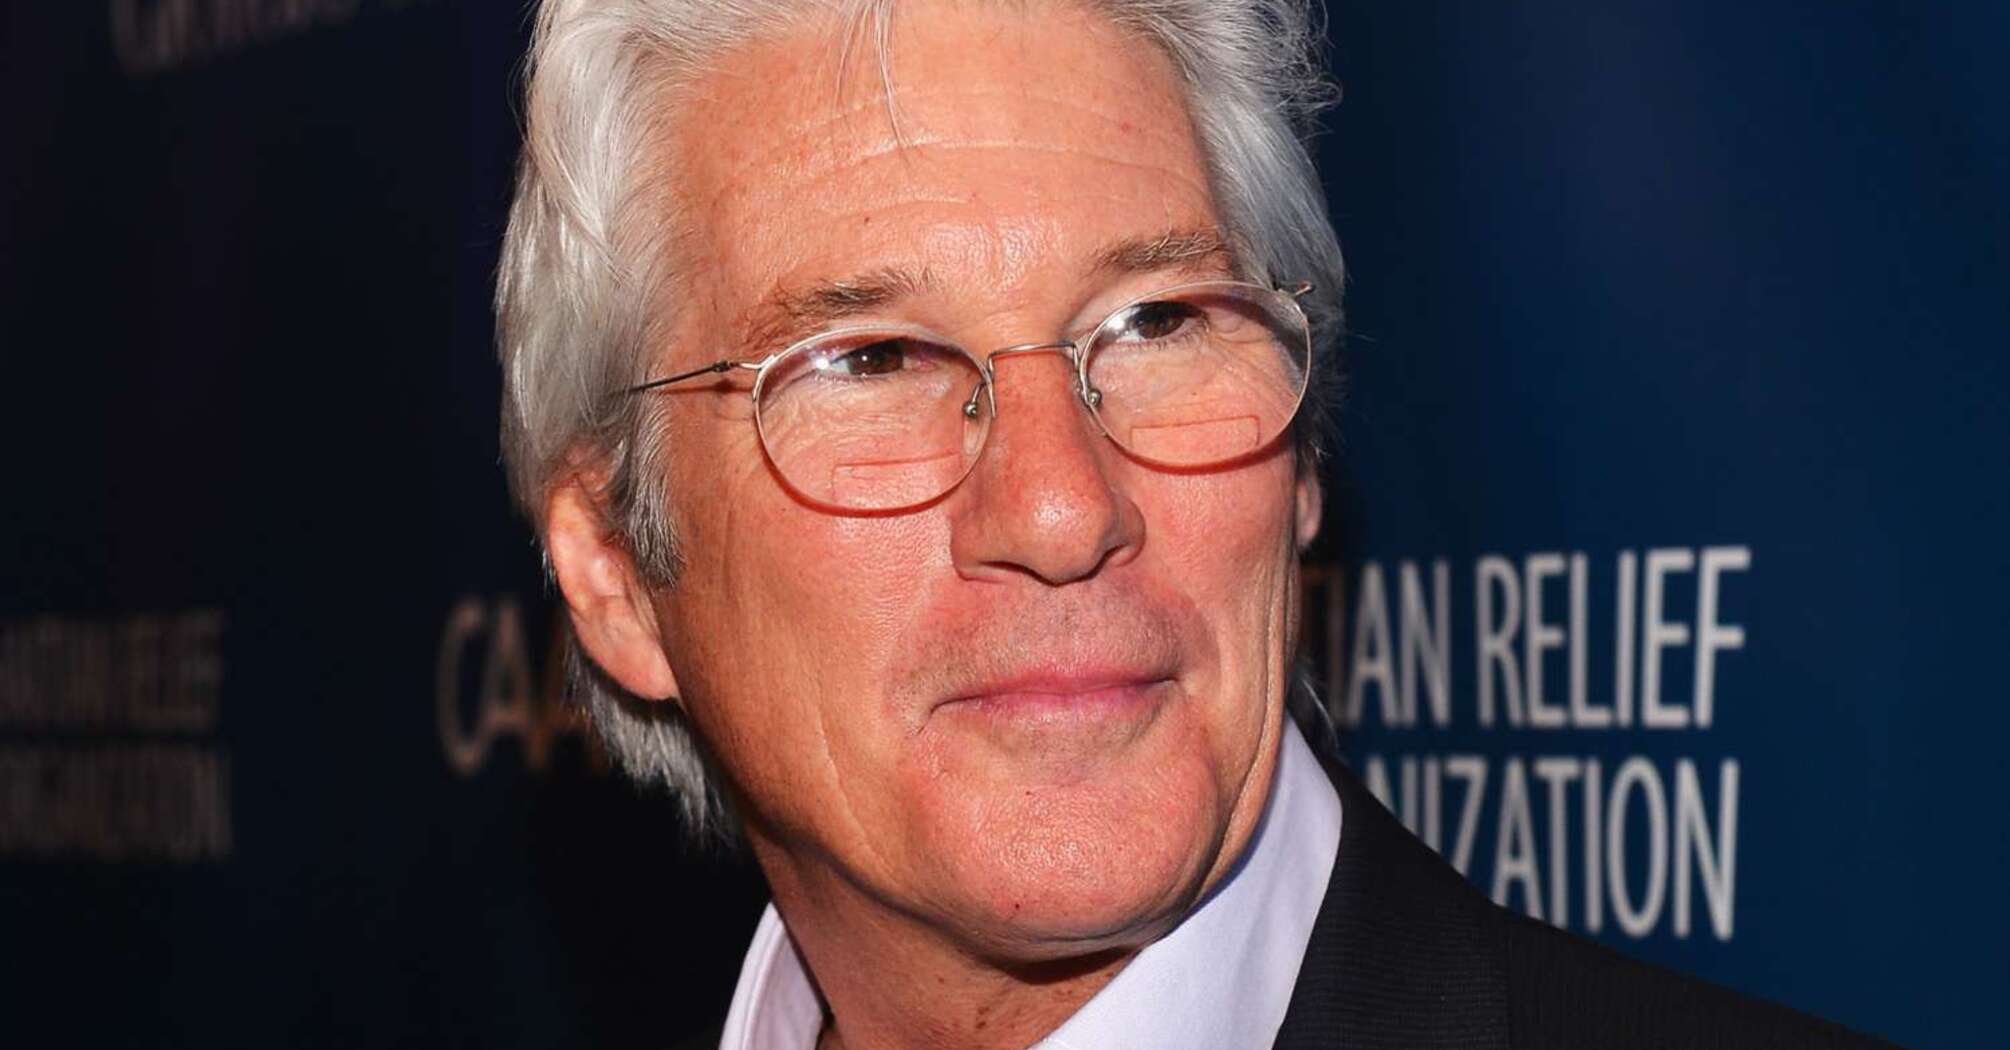 11 awesome facts about Richard Gere